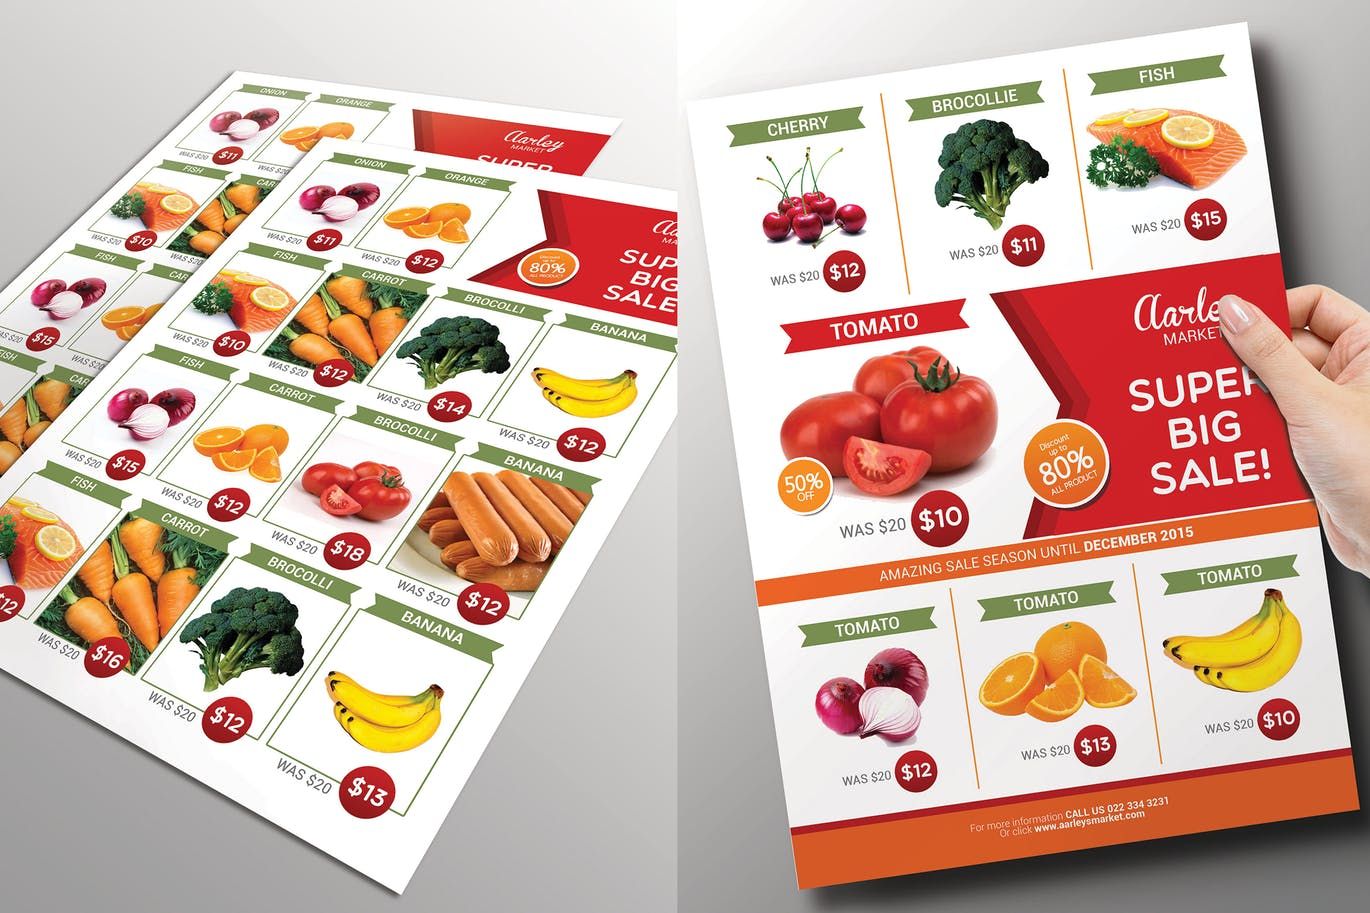 Supermarket Product Flyer By Aarleykaiven On Envato Elements Supermarket Design Flyer Design Layout Flyer